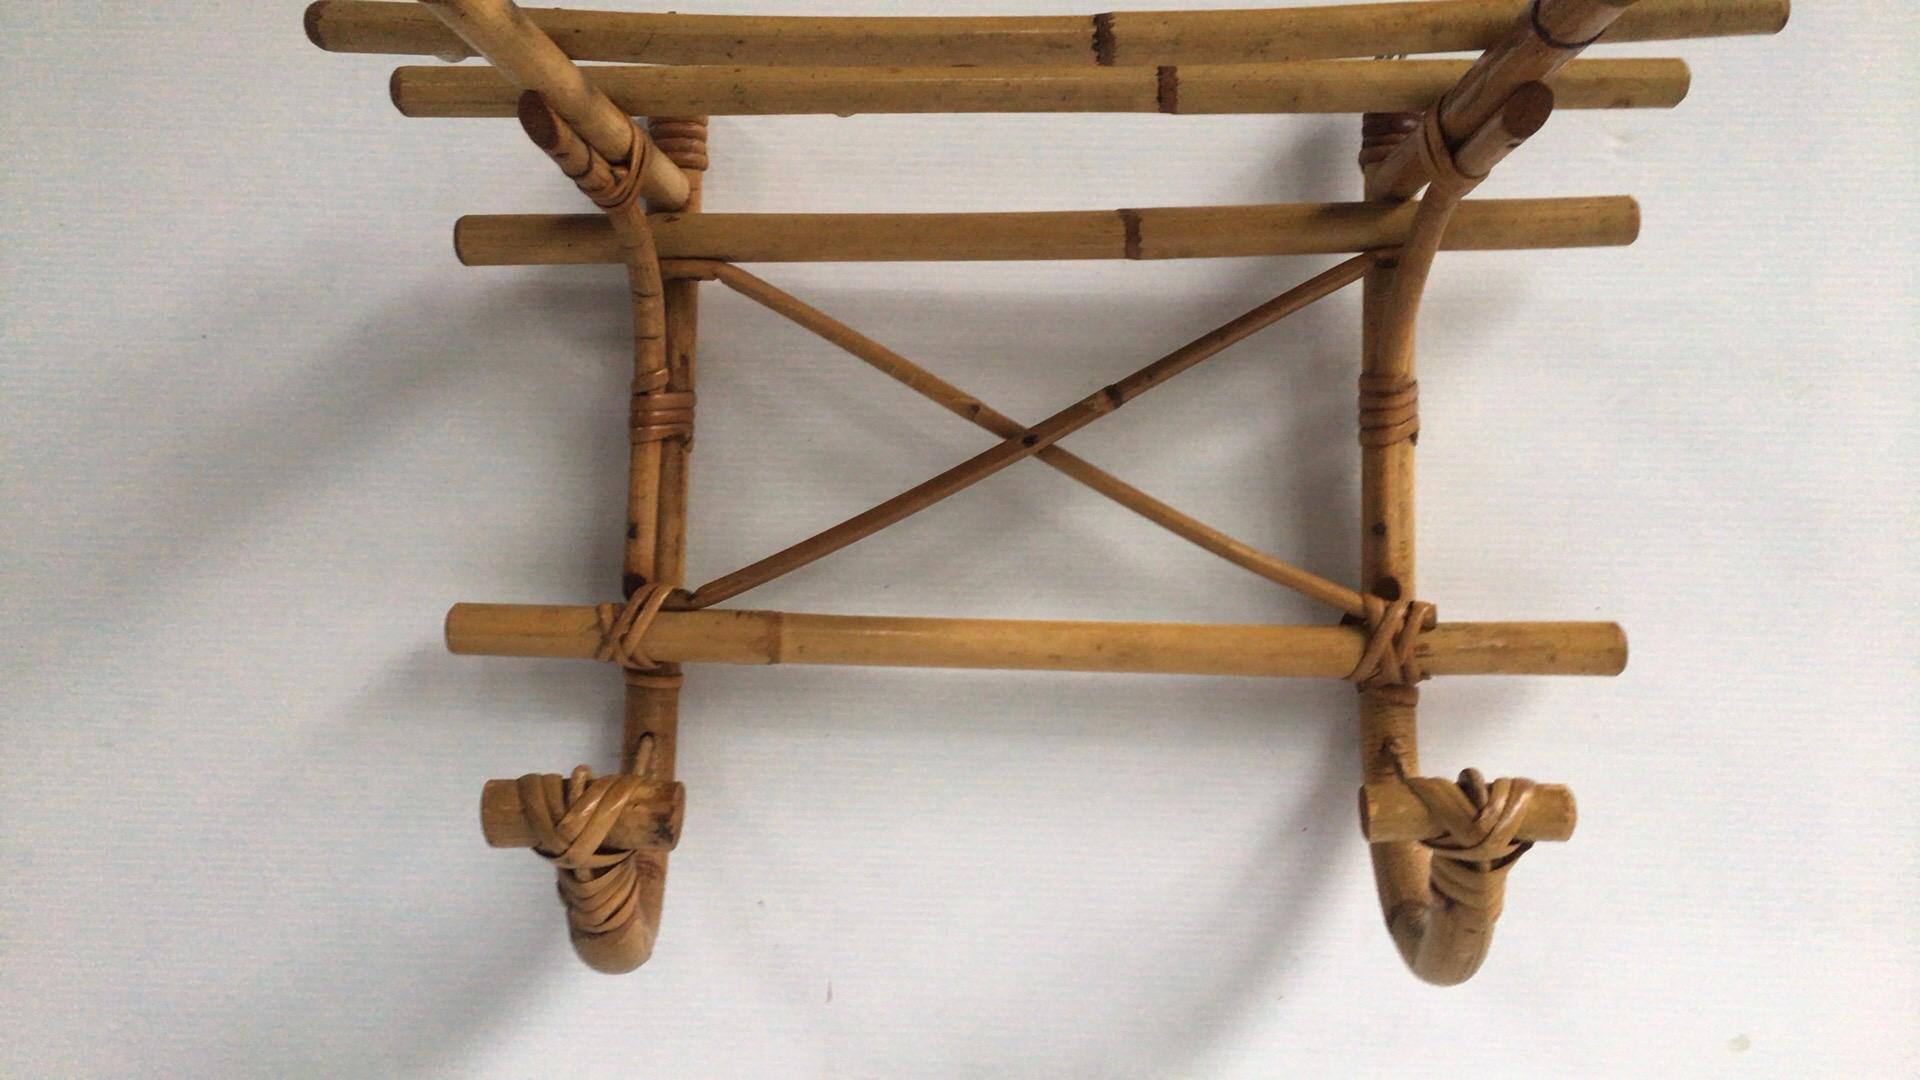 French rattan coat rack Louis Sognot, circa 1950.
Height / 12.5 inches.
Depth / 9.5 inches.
Width / 16 inches.